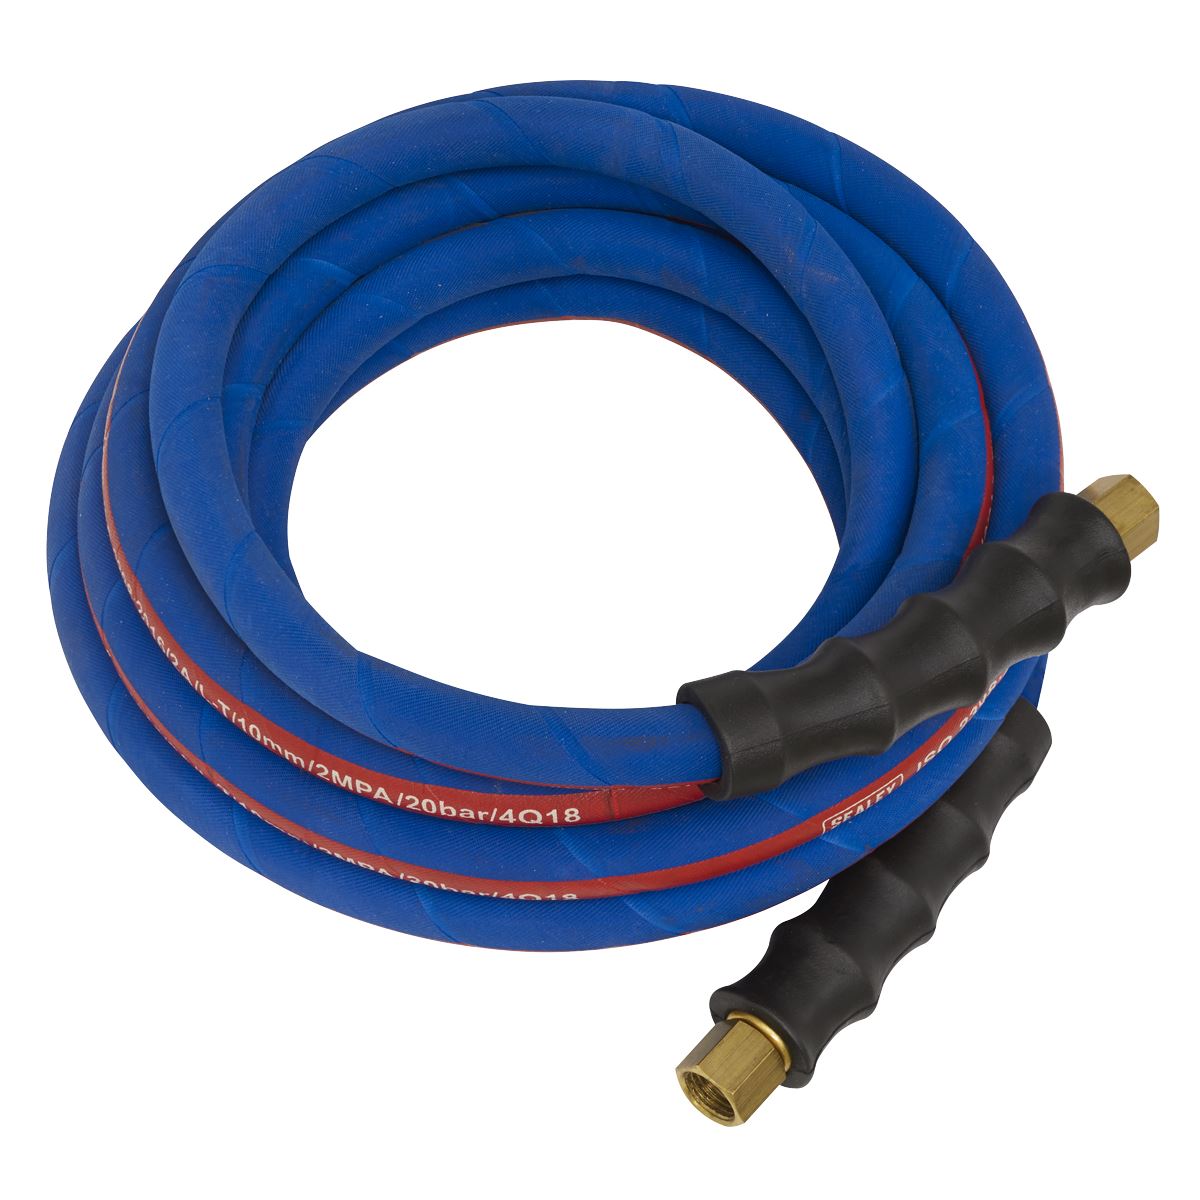 Sealey Air Hose 5m x Ø10mm with 1/4"BSP Unions Extra-Heavy-Duty